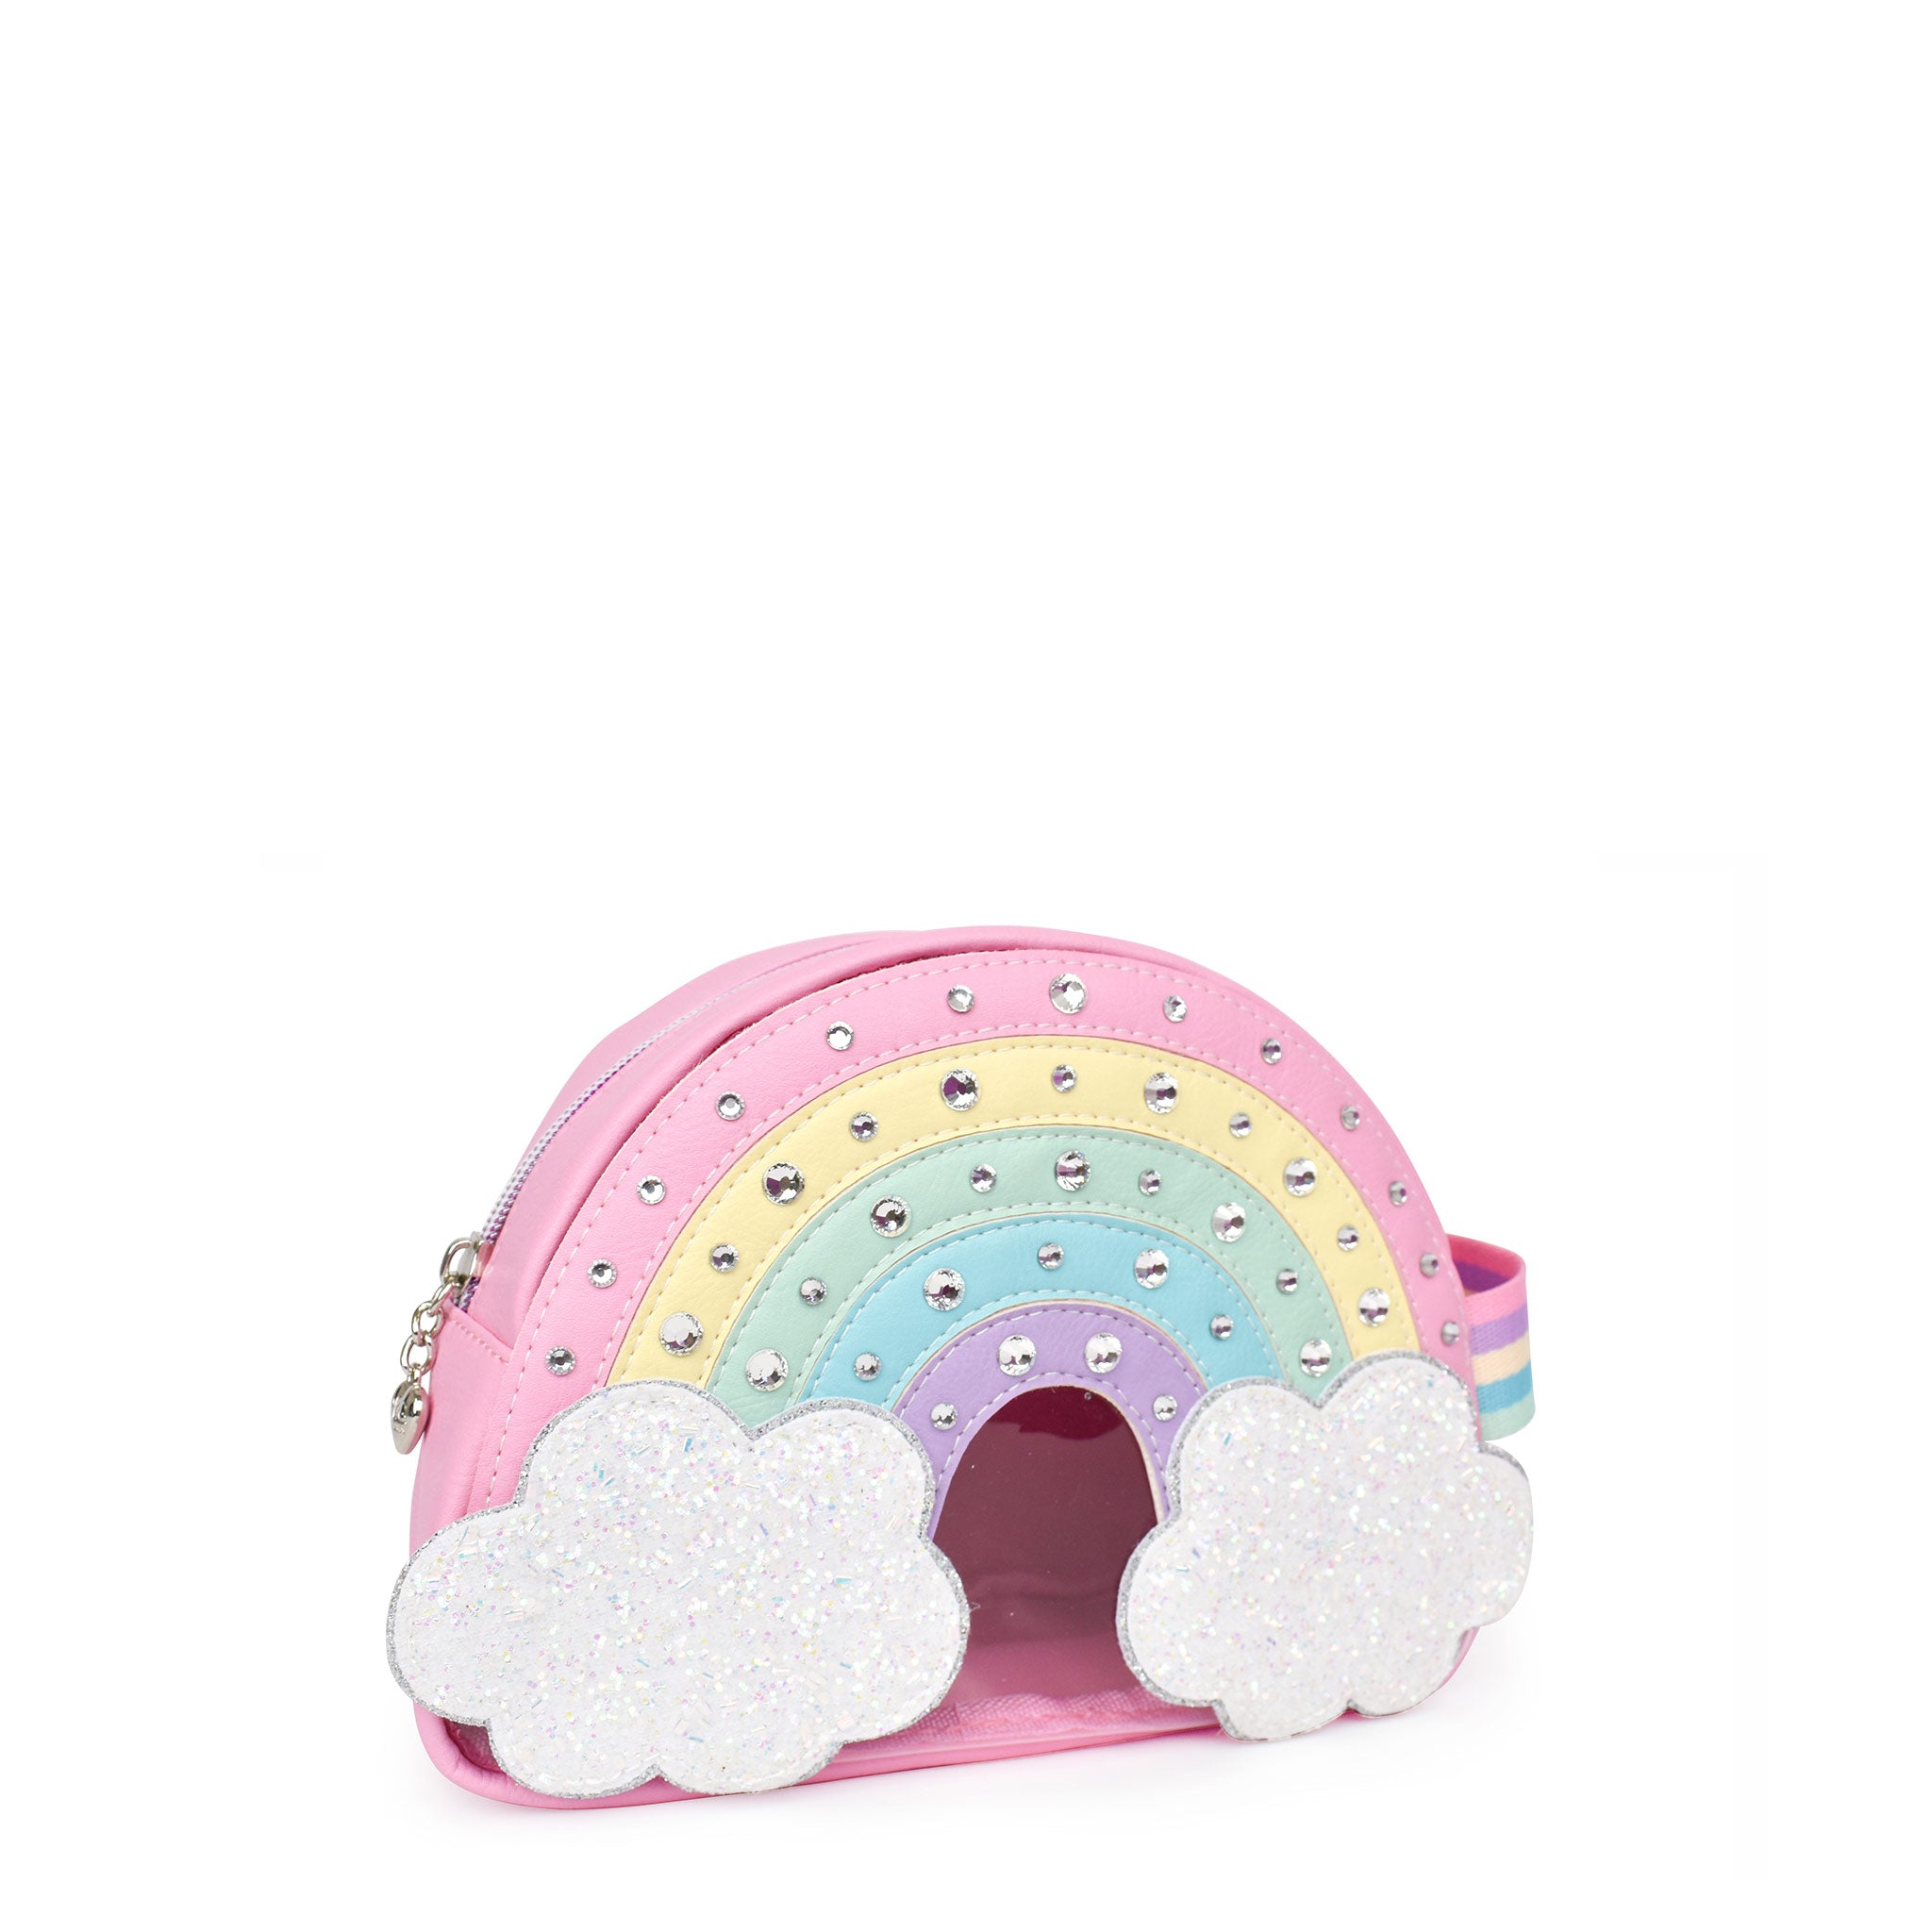 Side  view of rainbow shaped chear pouch embellished with rhinestones